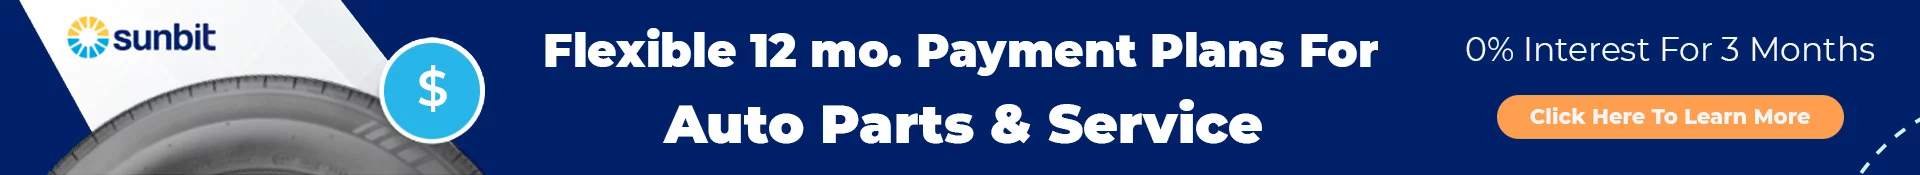 Payment Plans for Auto Parts and Service at Commonwealth Volkswagen